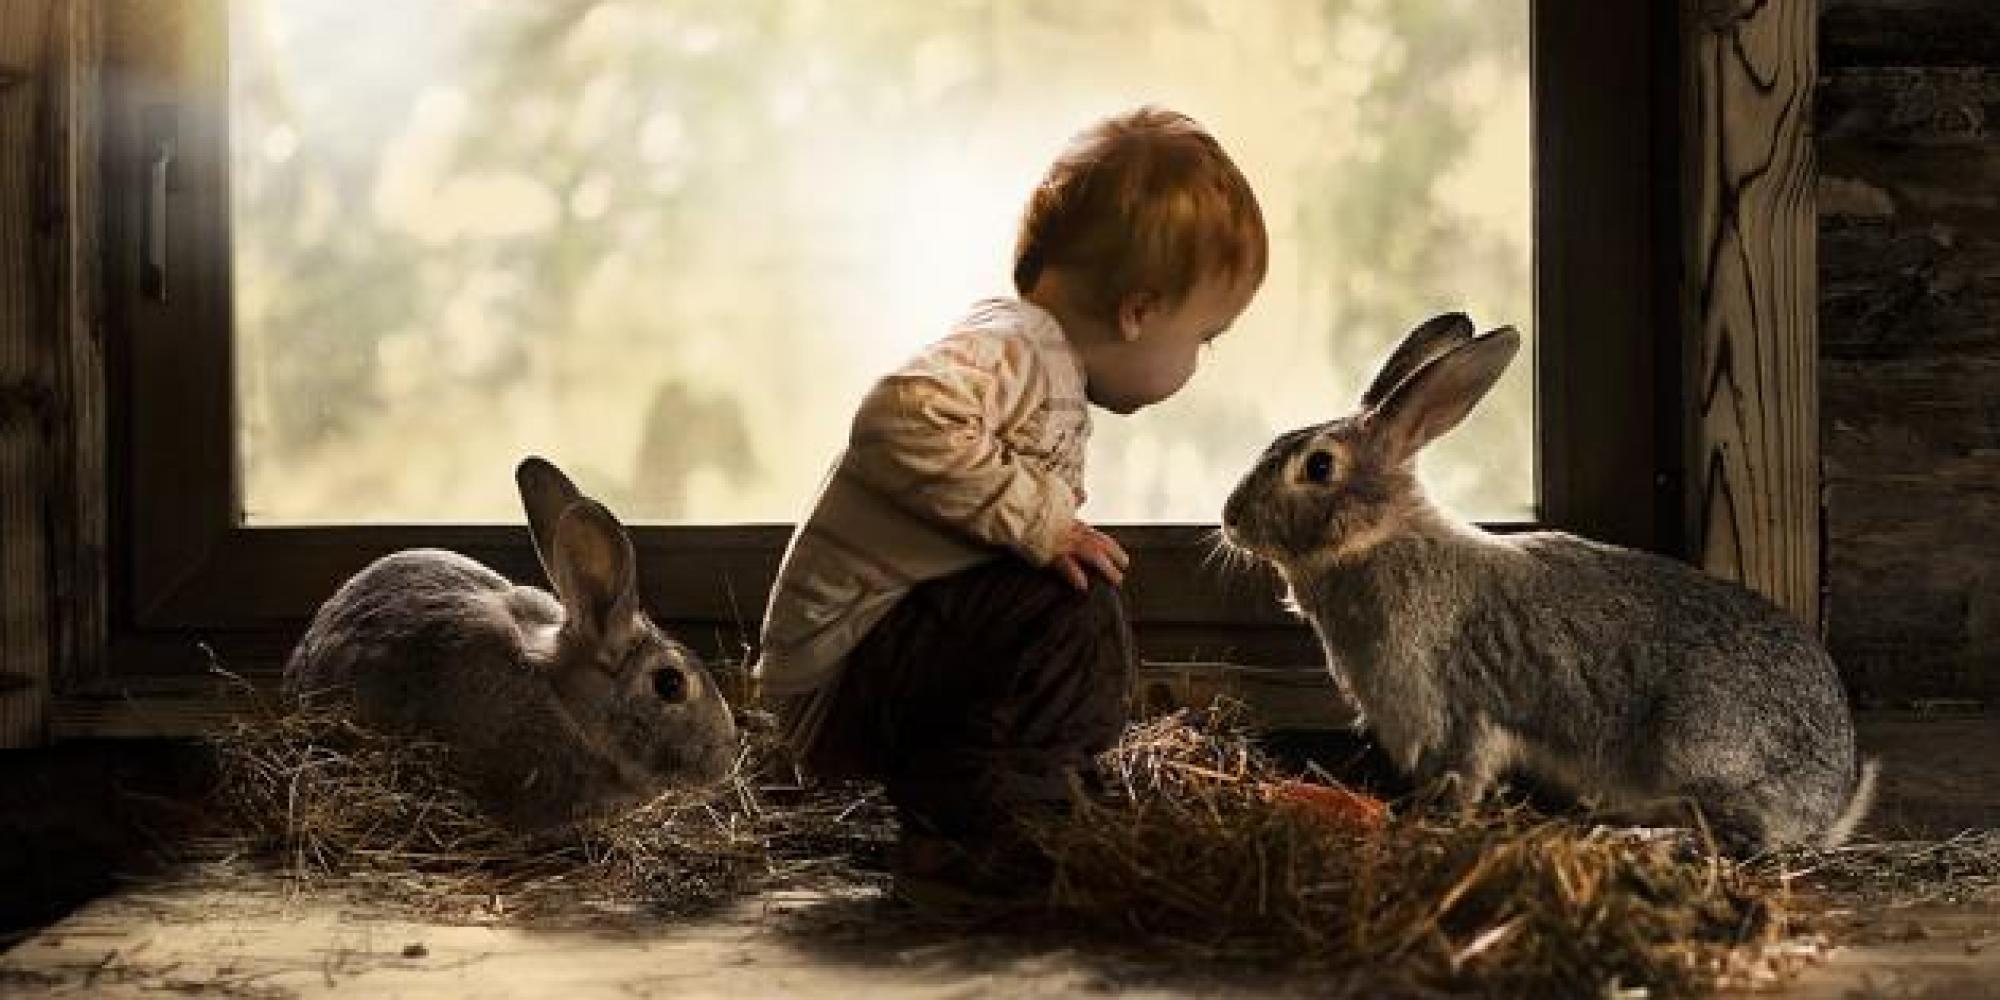 These 8 Magical Photos Of Child Animal Whisperers Will Make You Happy